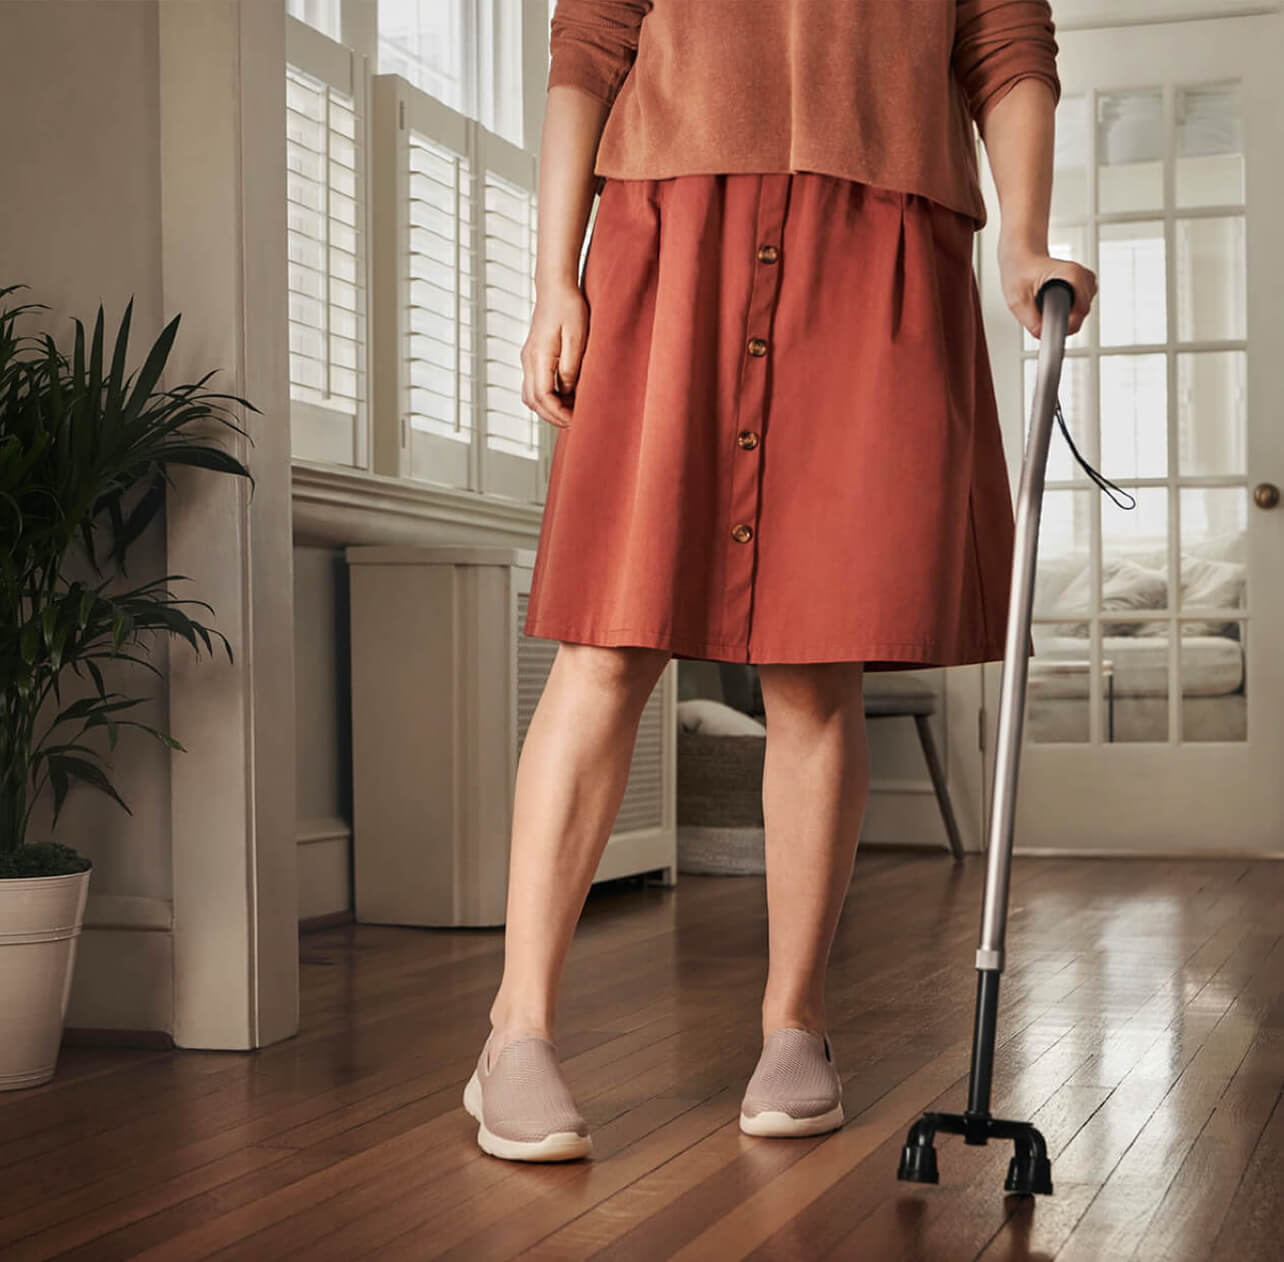 Image of a woman standing with a cane